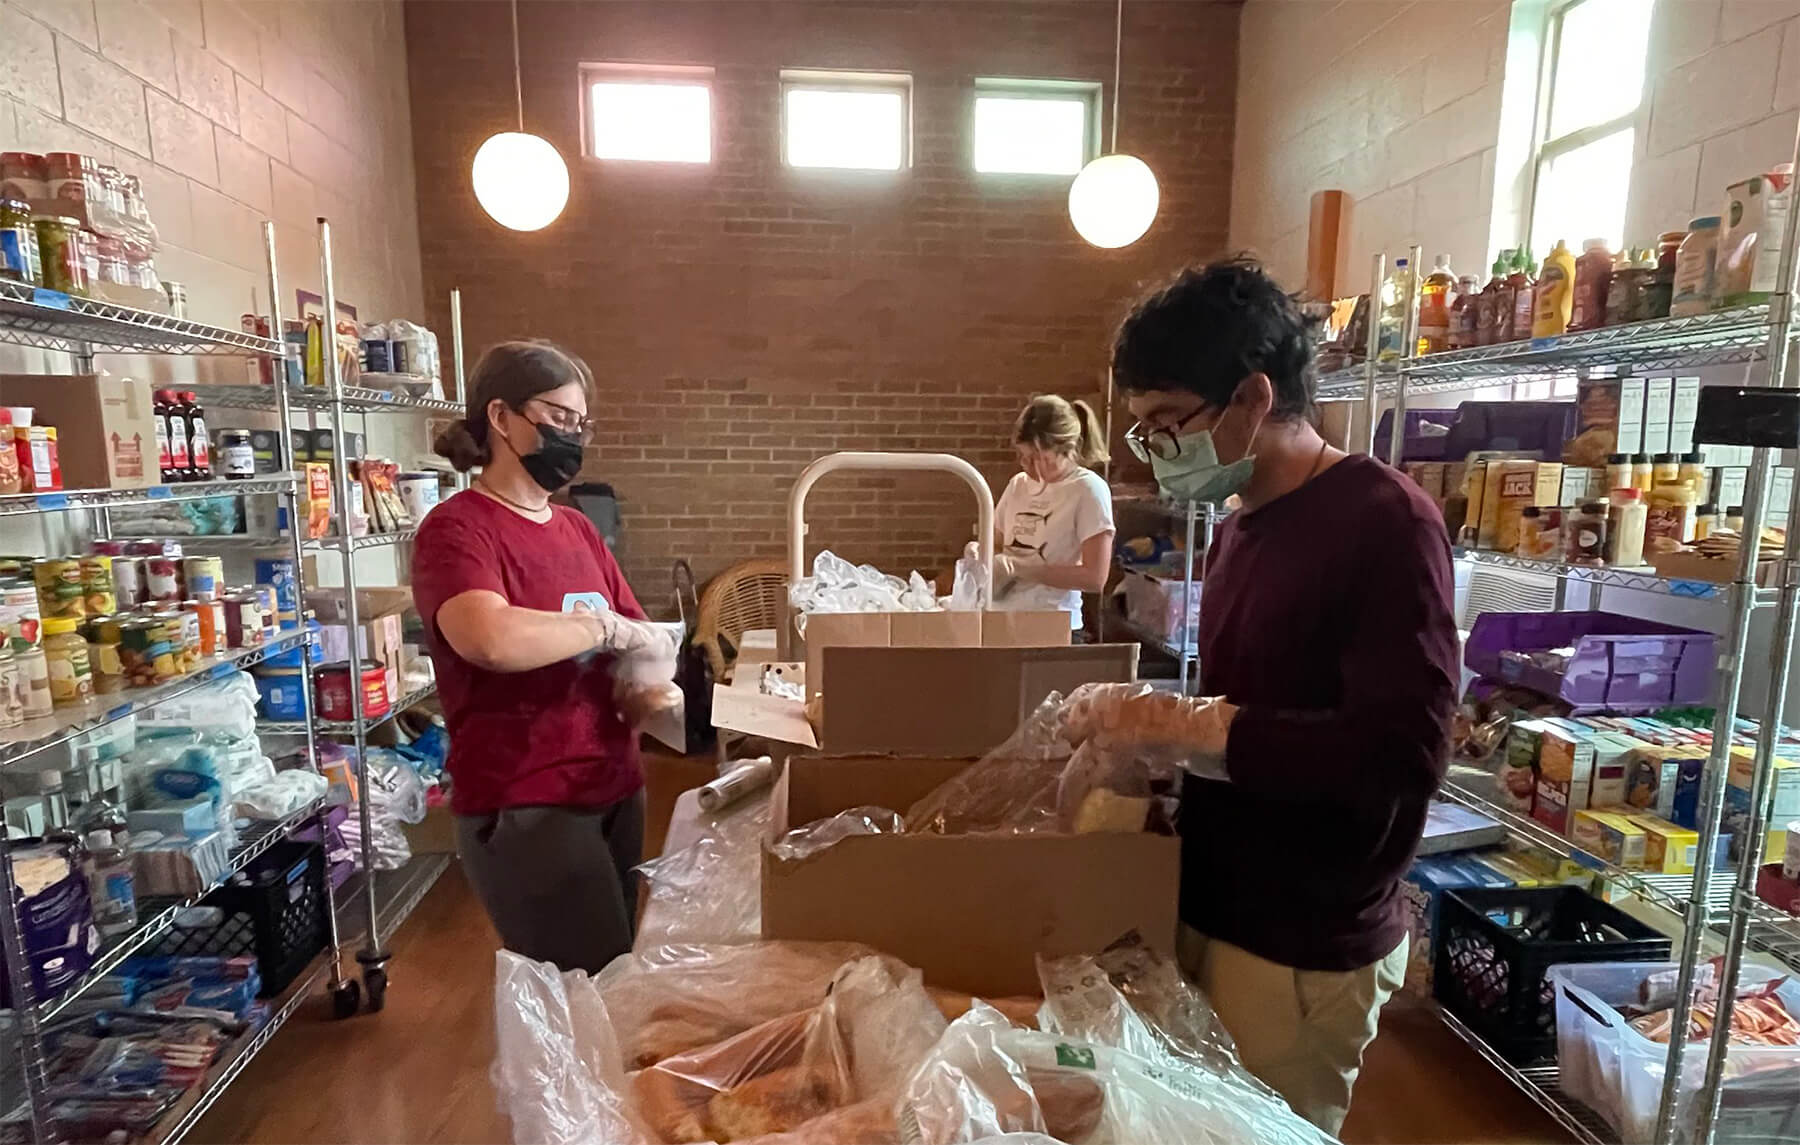 ACE Food Pantry volunteers sort donations from Panera Bread in West Lafayette, IN (Photo courtesy of ACE Food Pantry).